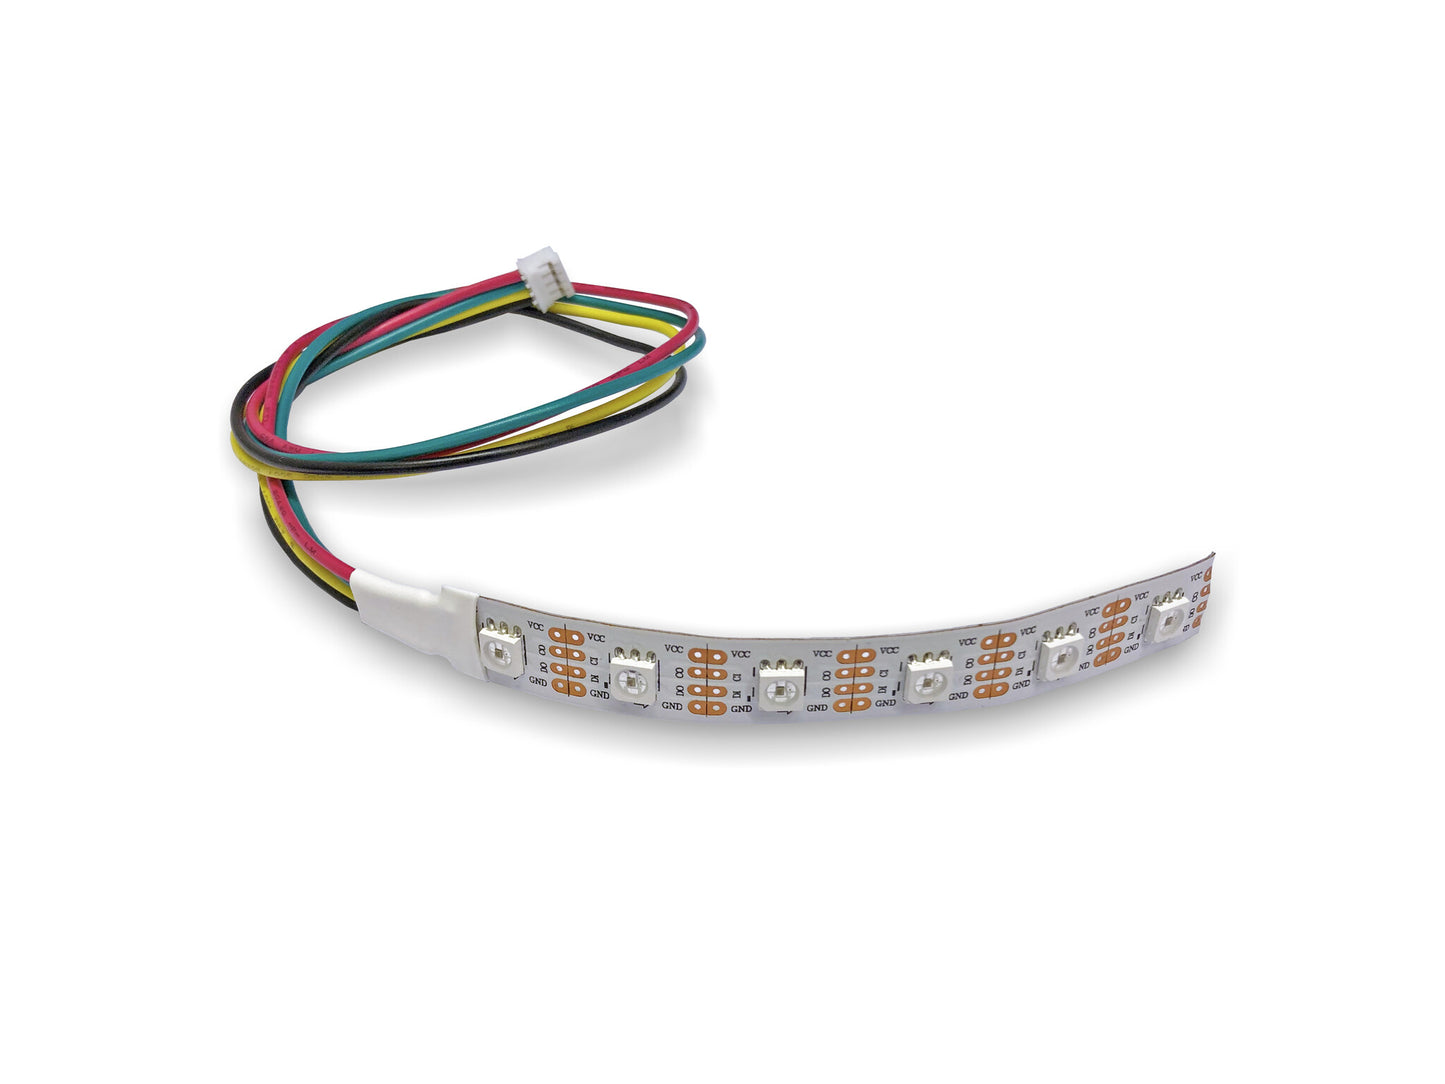 Nexmosphere 42 LED; 180cm cable, X-Wave connector